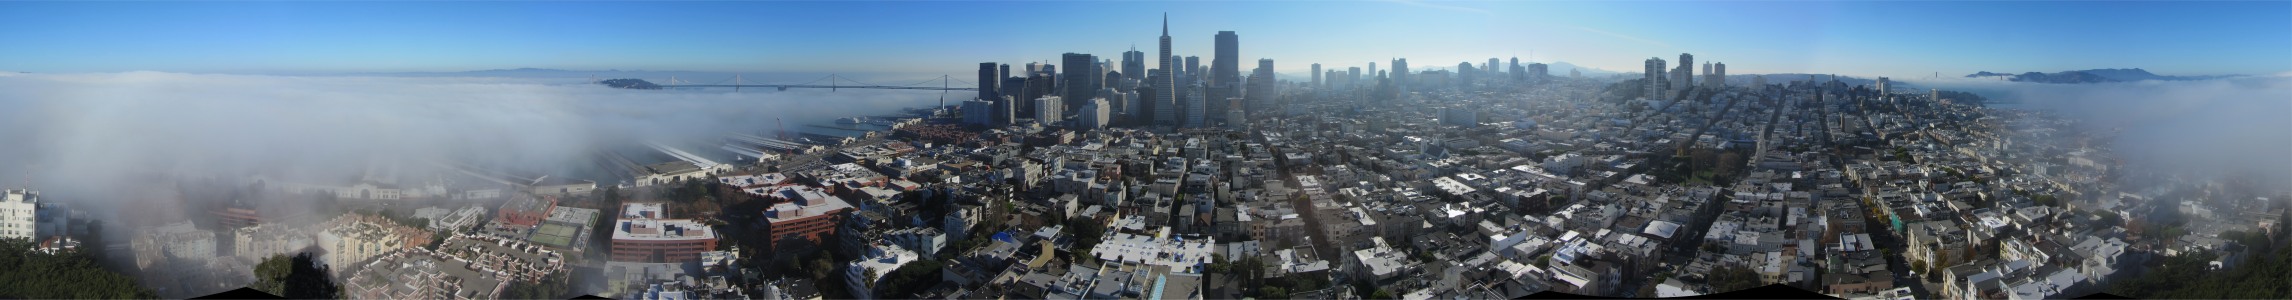 view_from_coit_tower